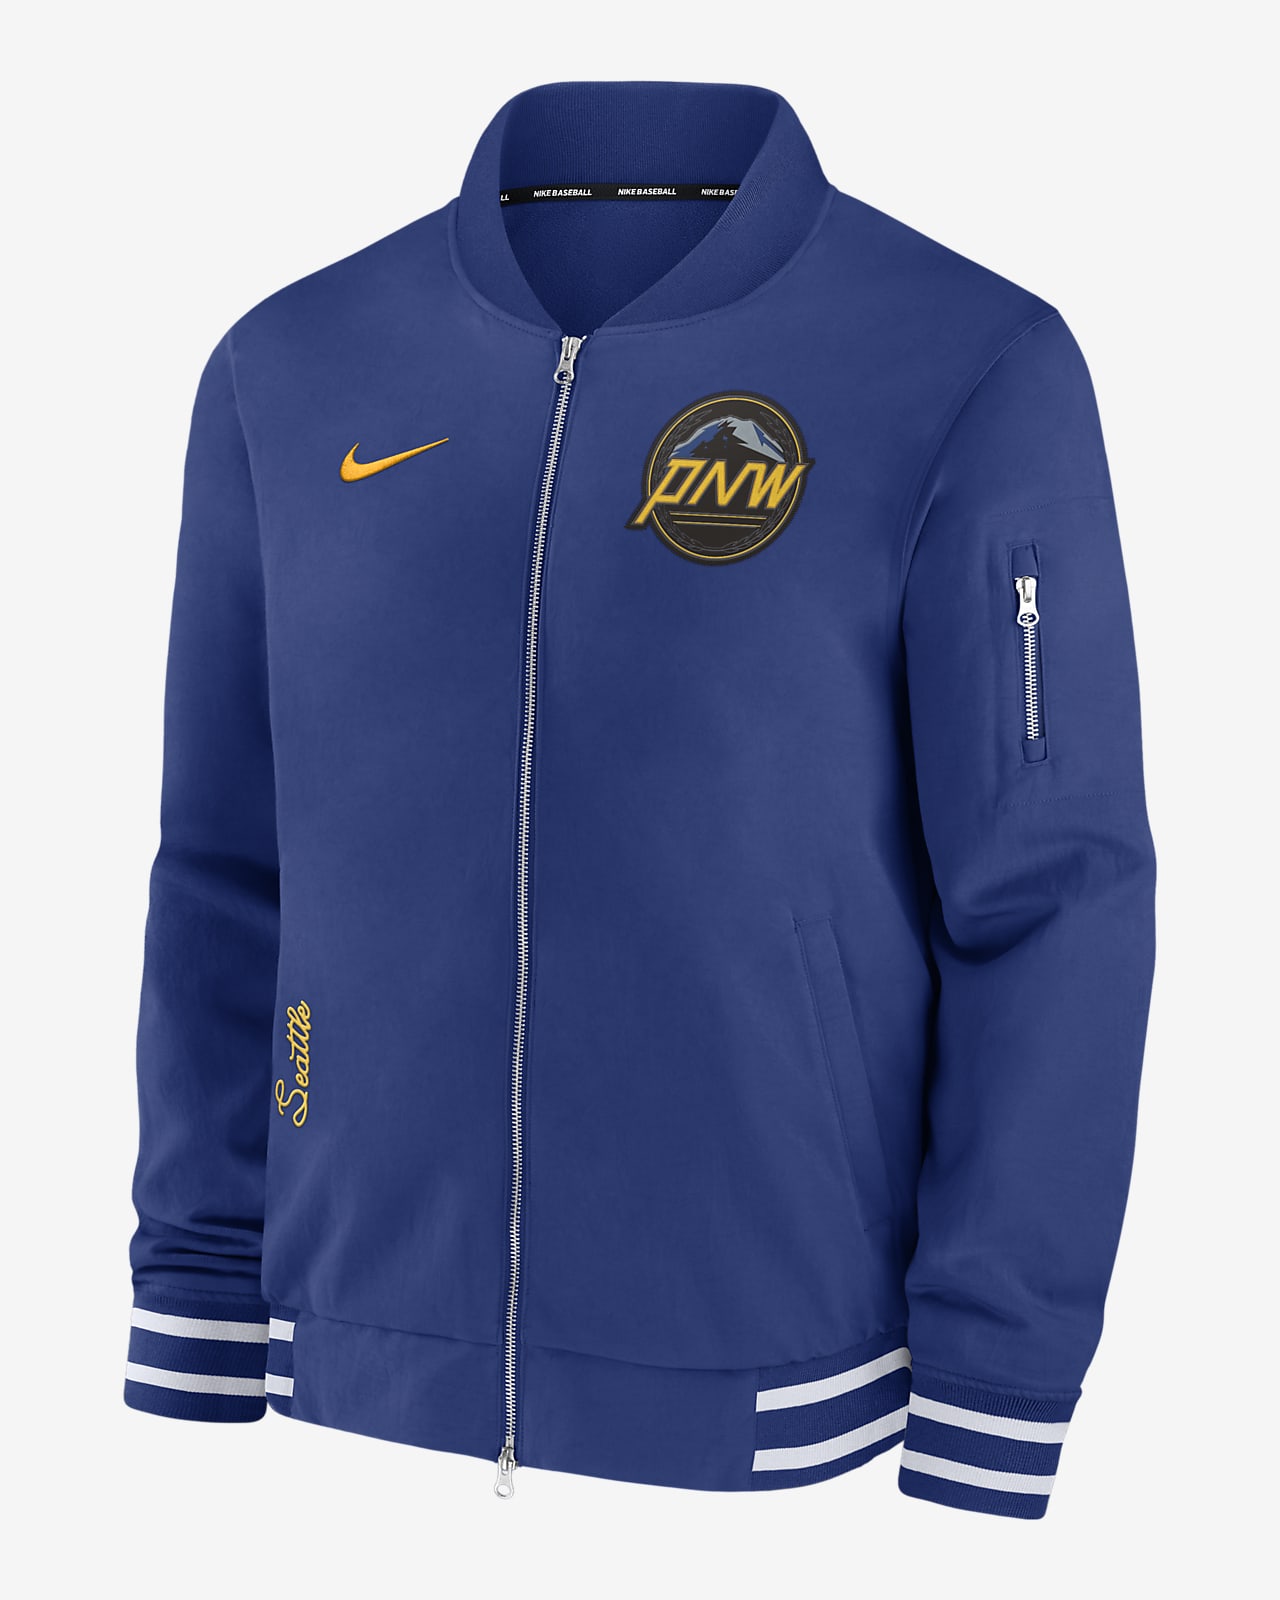 Chamarra bomber Nike de la MLB con cierre completo para hombre Seattle Mariners Authentic Collection City Connect Game Time